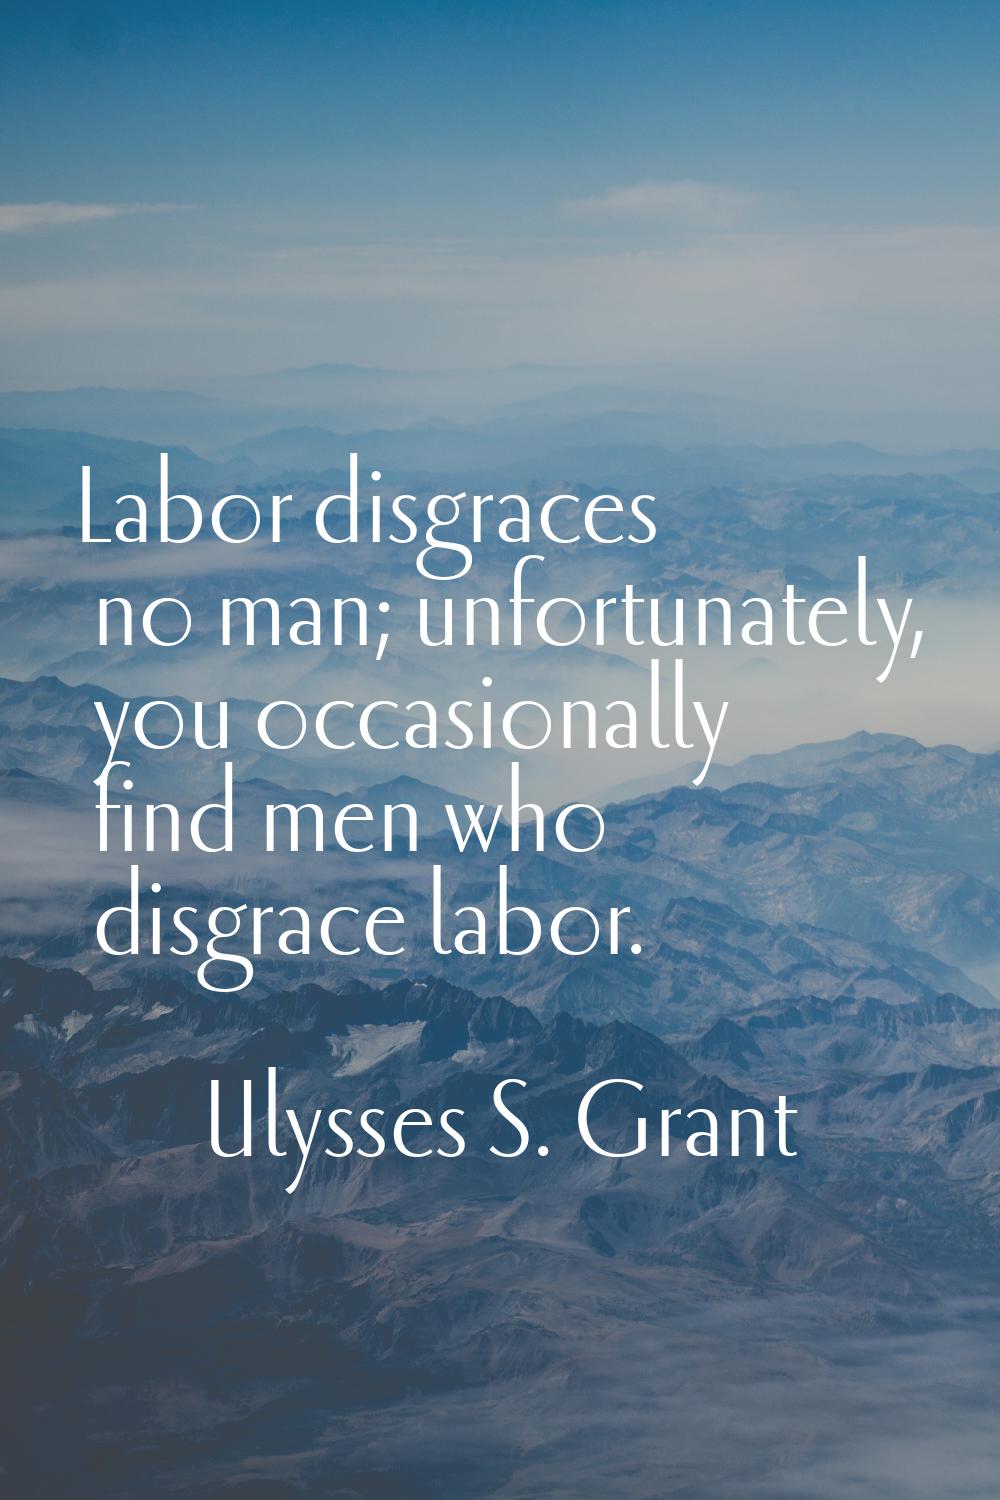 Labor disgraces no man; unfortunately, you occasionally find men who disgrace labor.